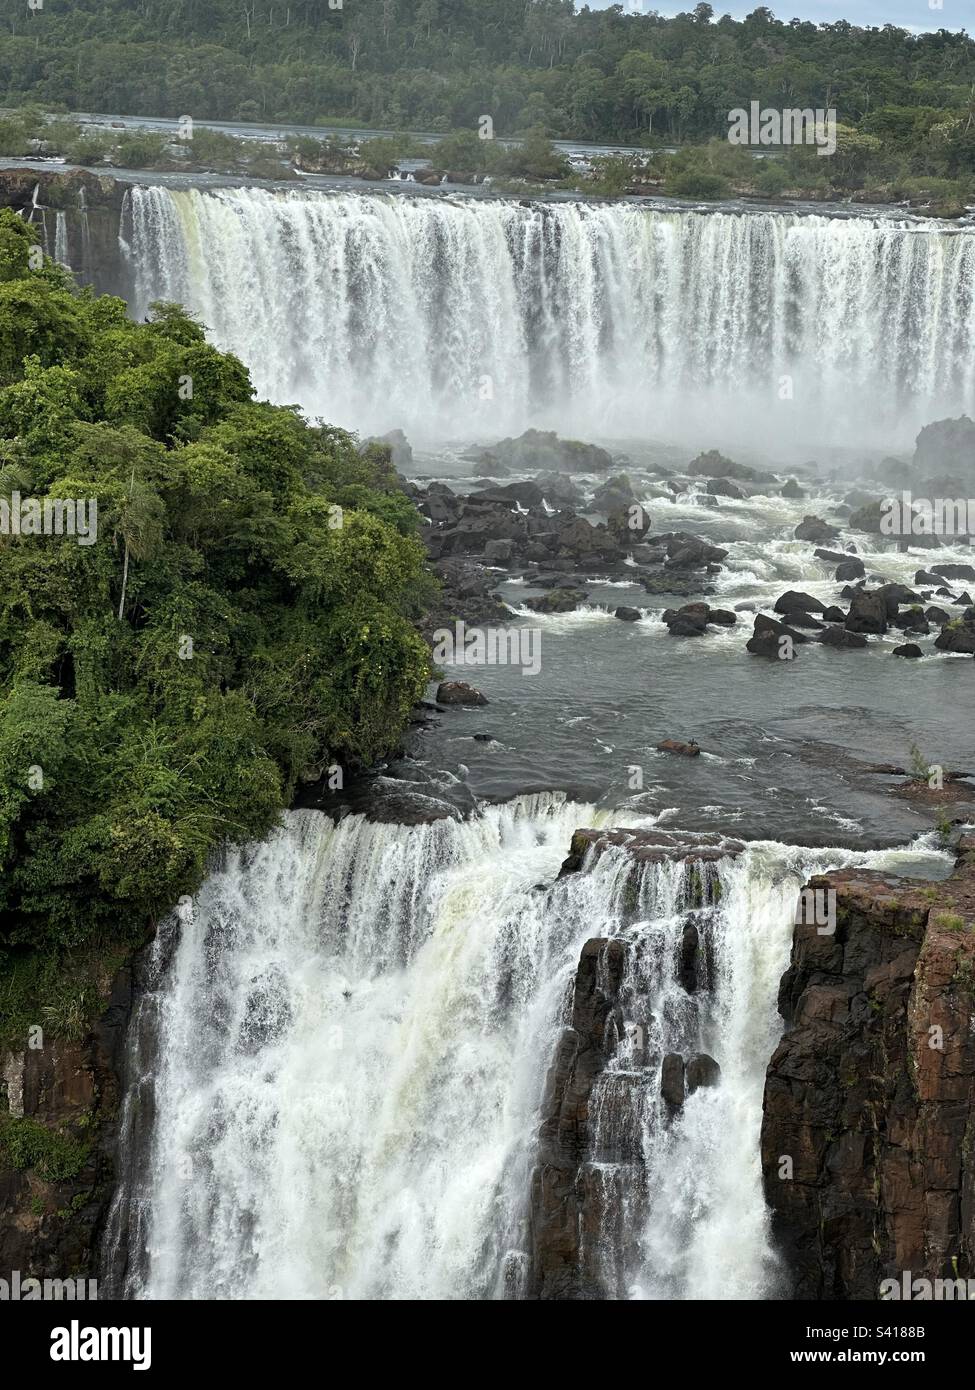 Half cloudy and blue day despite everything, a green forest around and in the background of the image some of the various waterfalls of the Iguaçu river falls in Foz do Iguaçu-Brazil Stock Photo